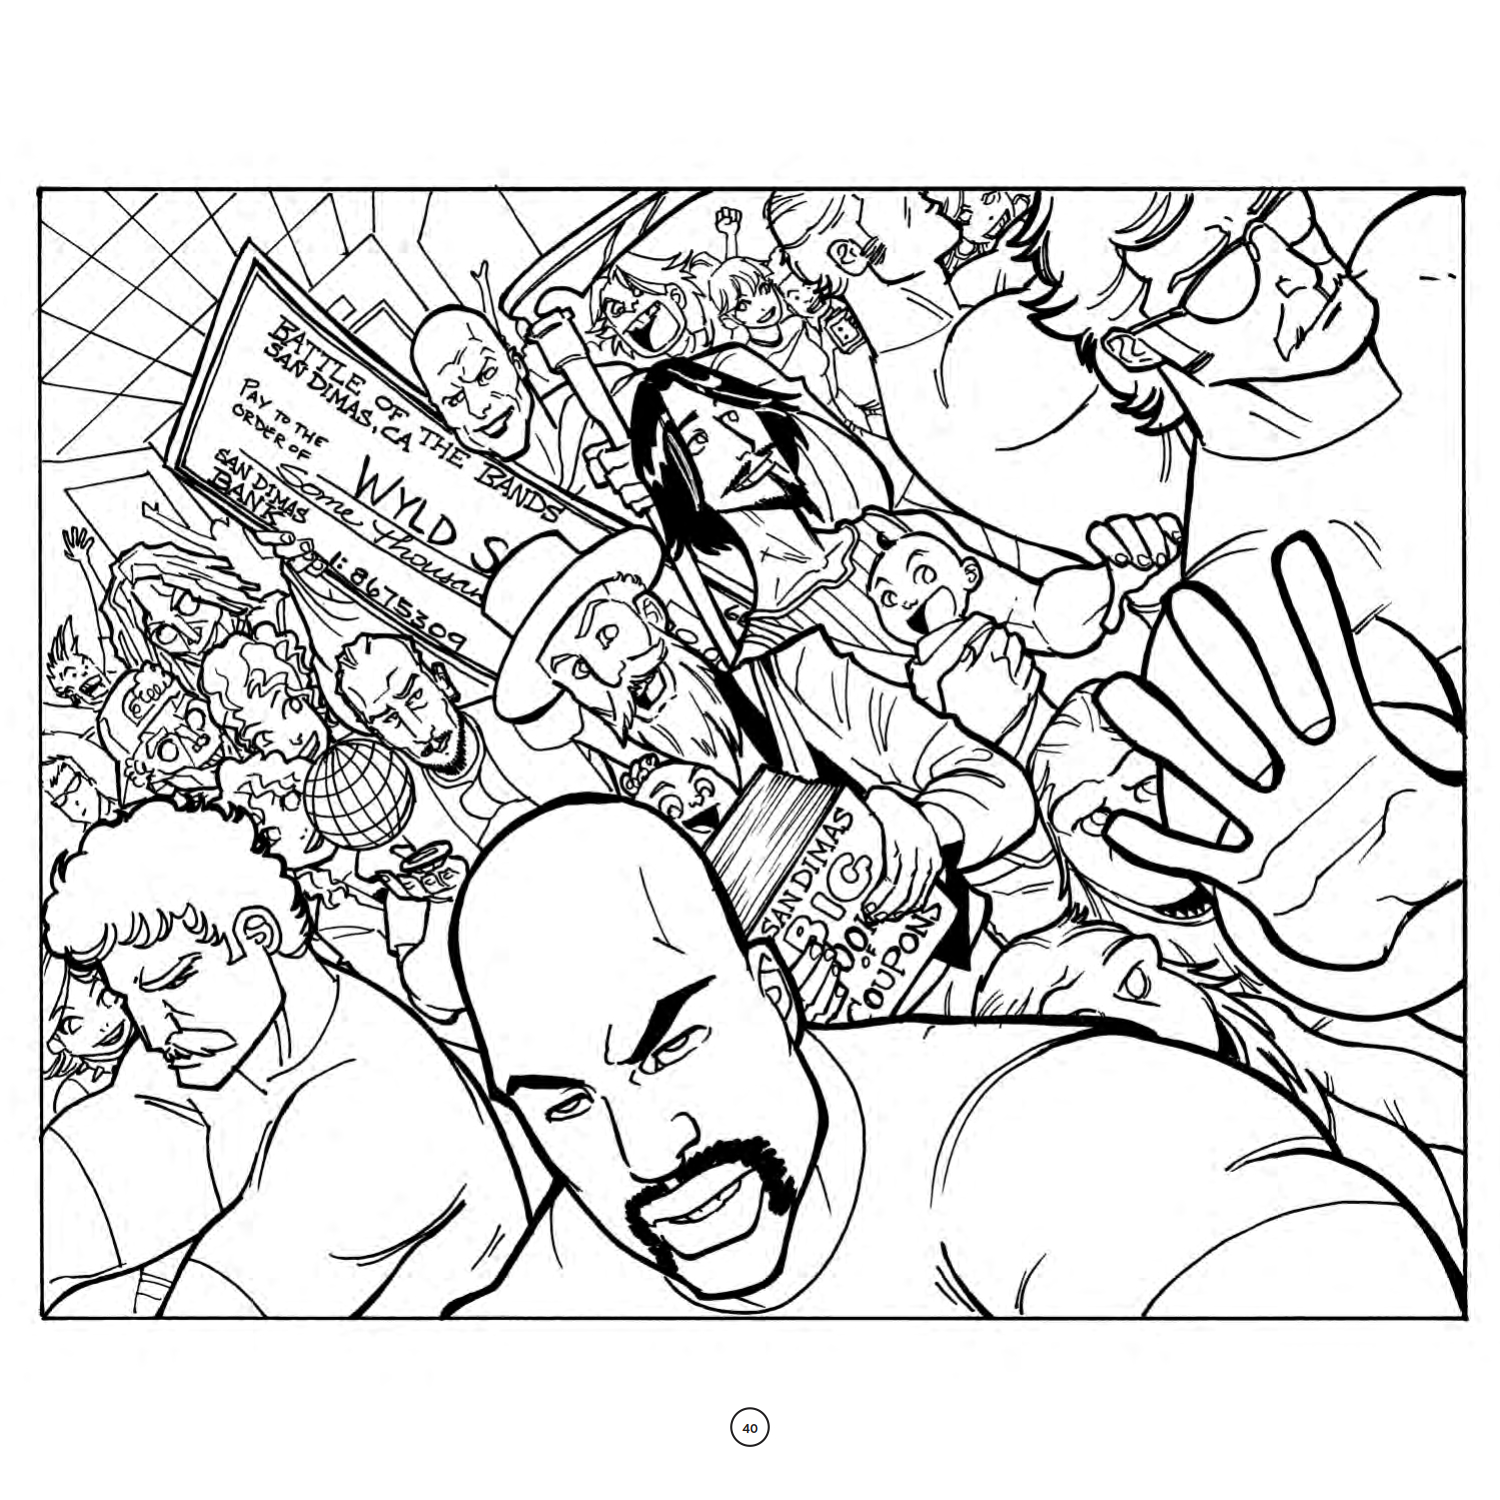 Bill&Ted’s Most Excellent Adult Coloring SC_PRESS_42